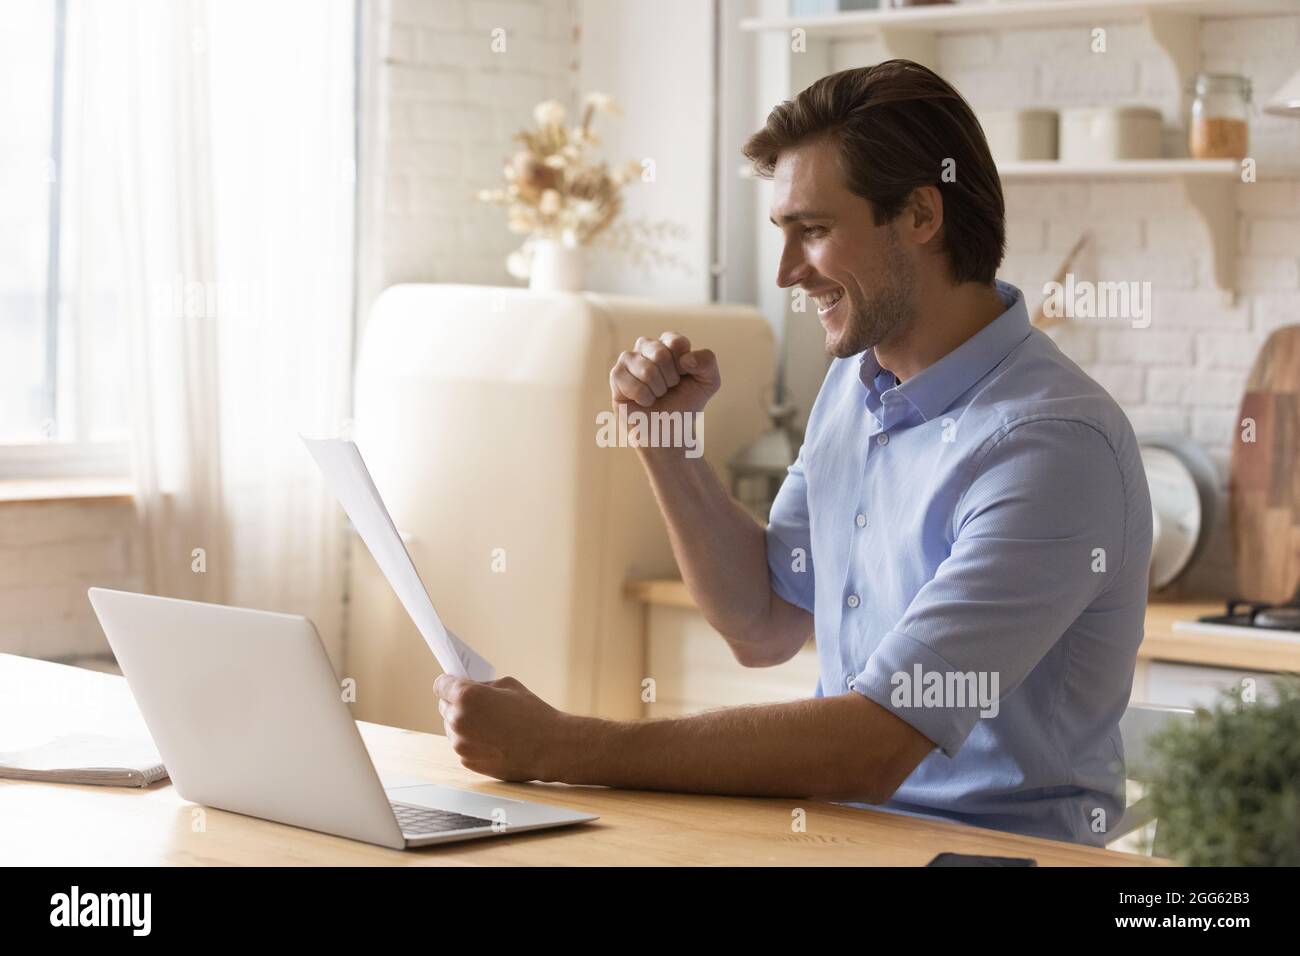 Joyful young man celebrating success reading news in letter. Stock Photo